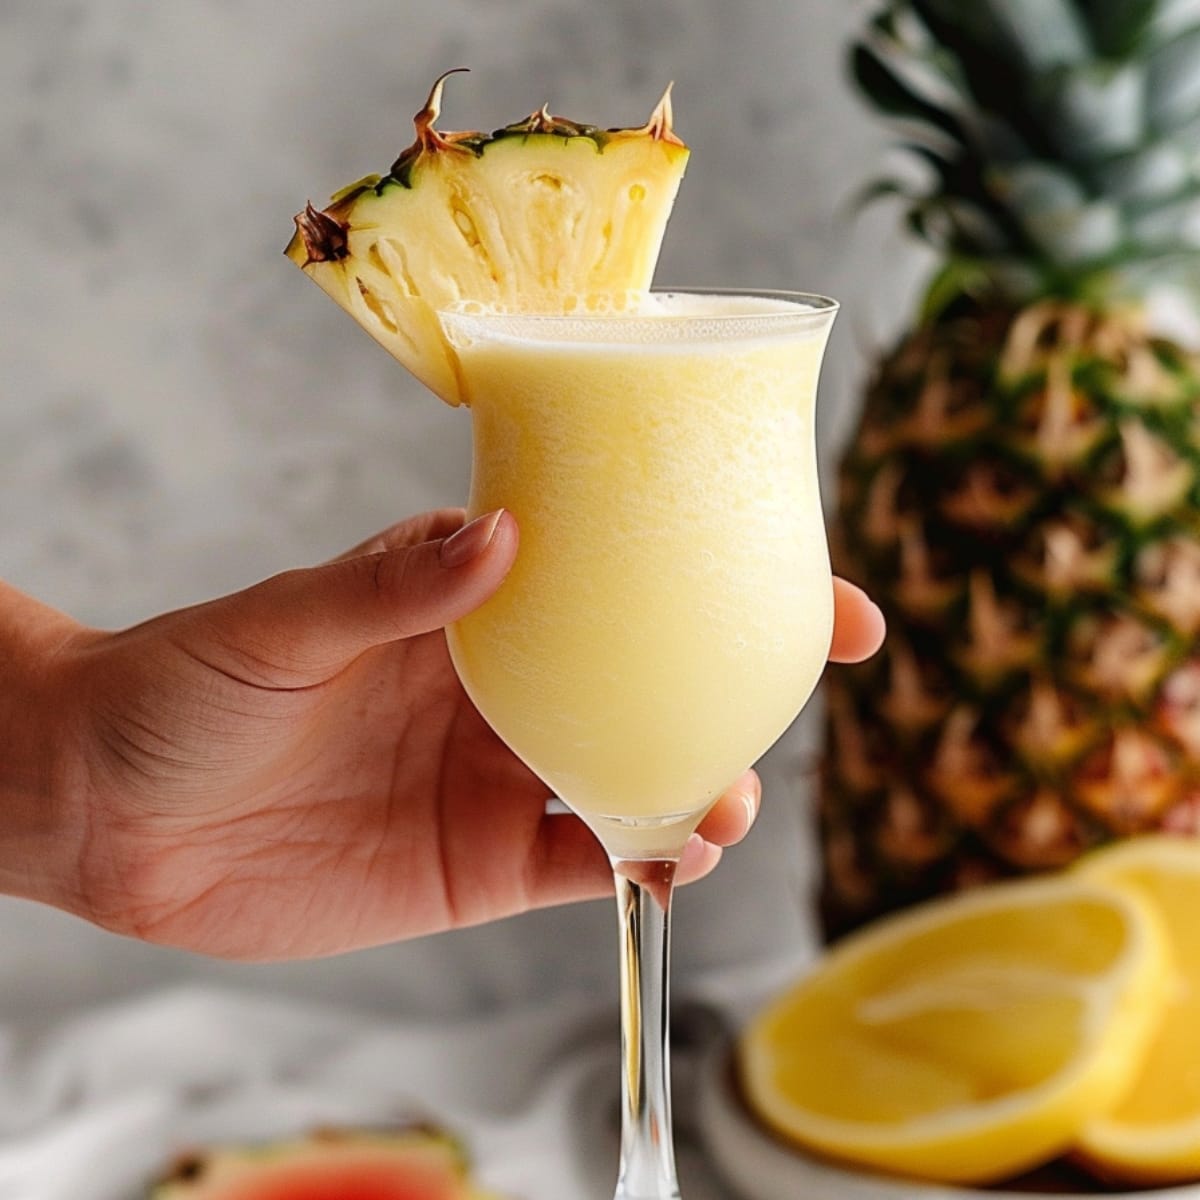 A hand holding a pina colada with pineapple wedge